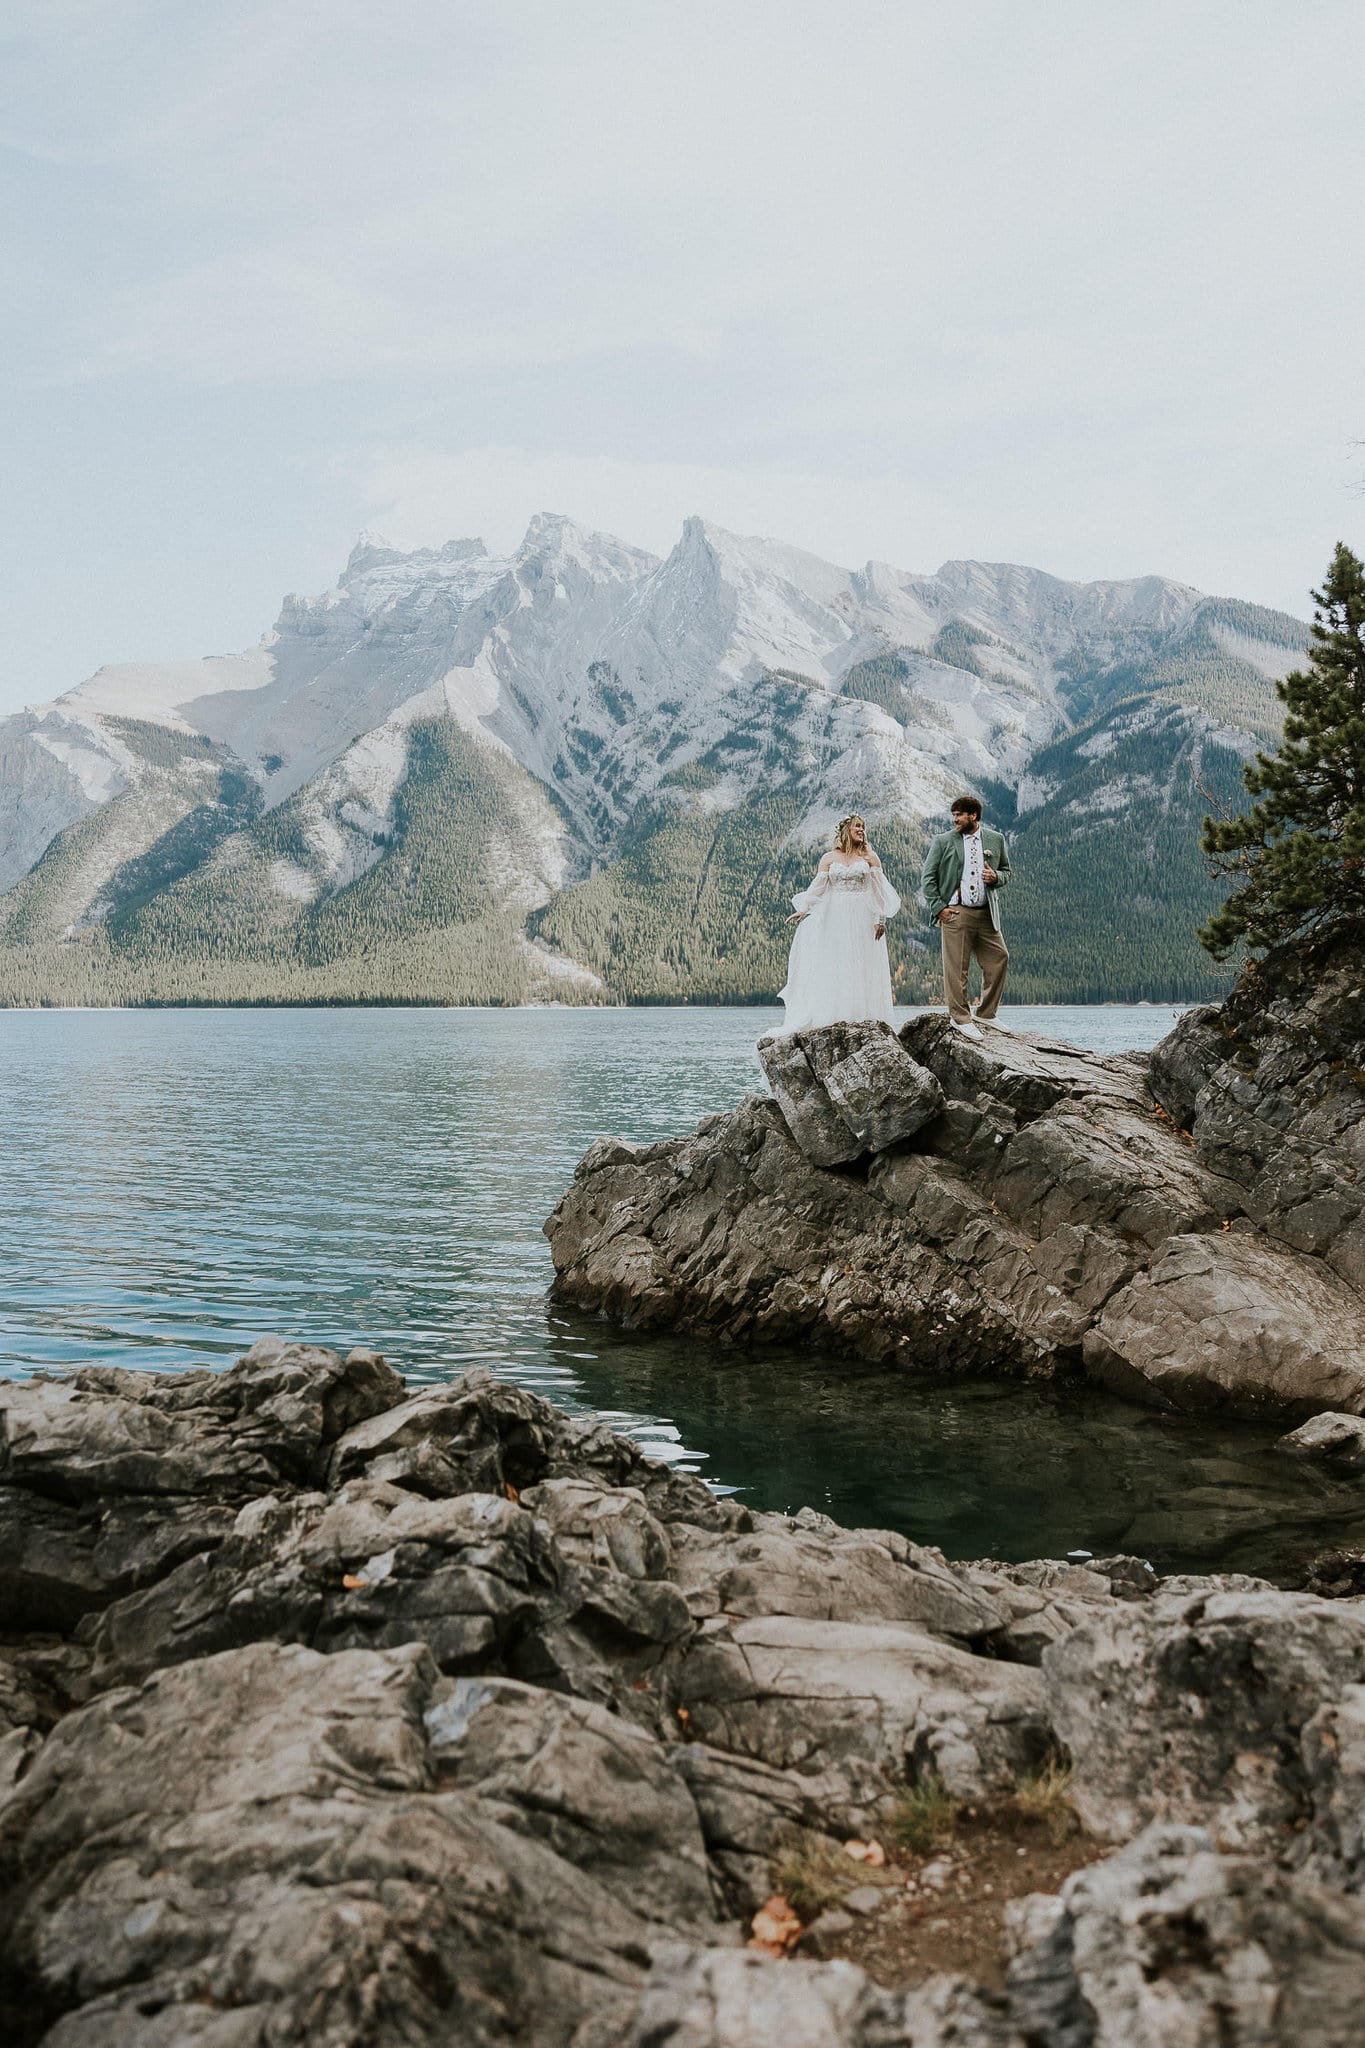 Courtney and mike stand on rocks at lake minnewanka in Banff national park on their wedding day.